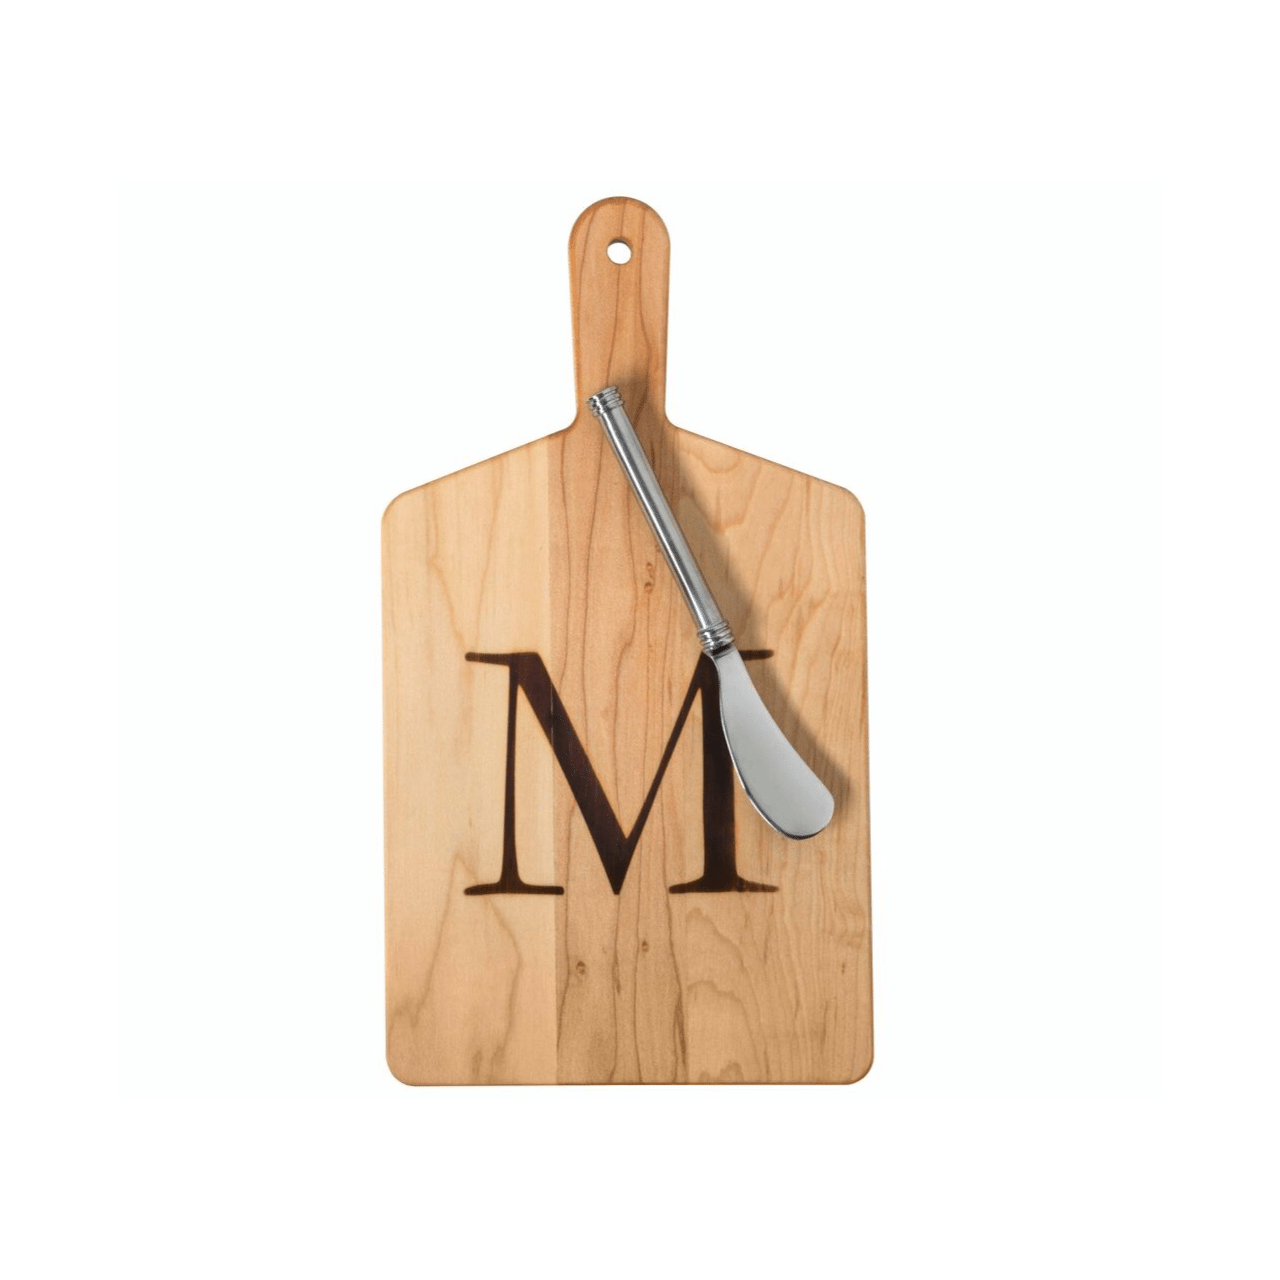 Maple Cheese Board with a Stamped D and Metal Spreader